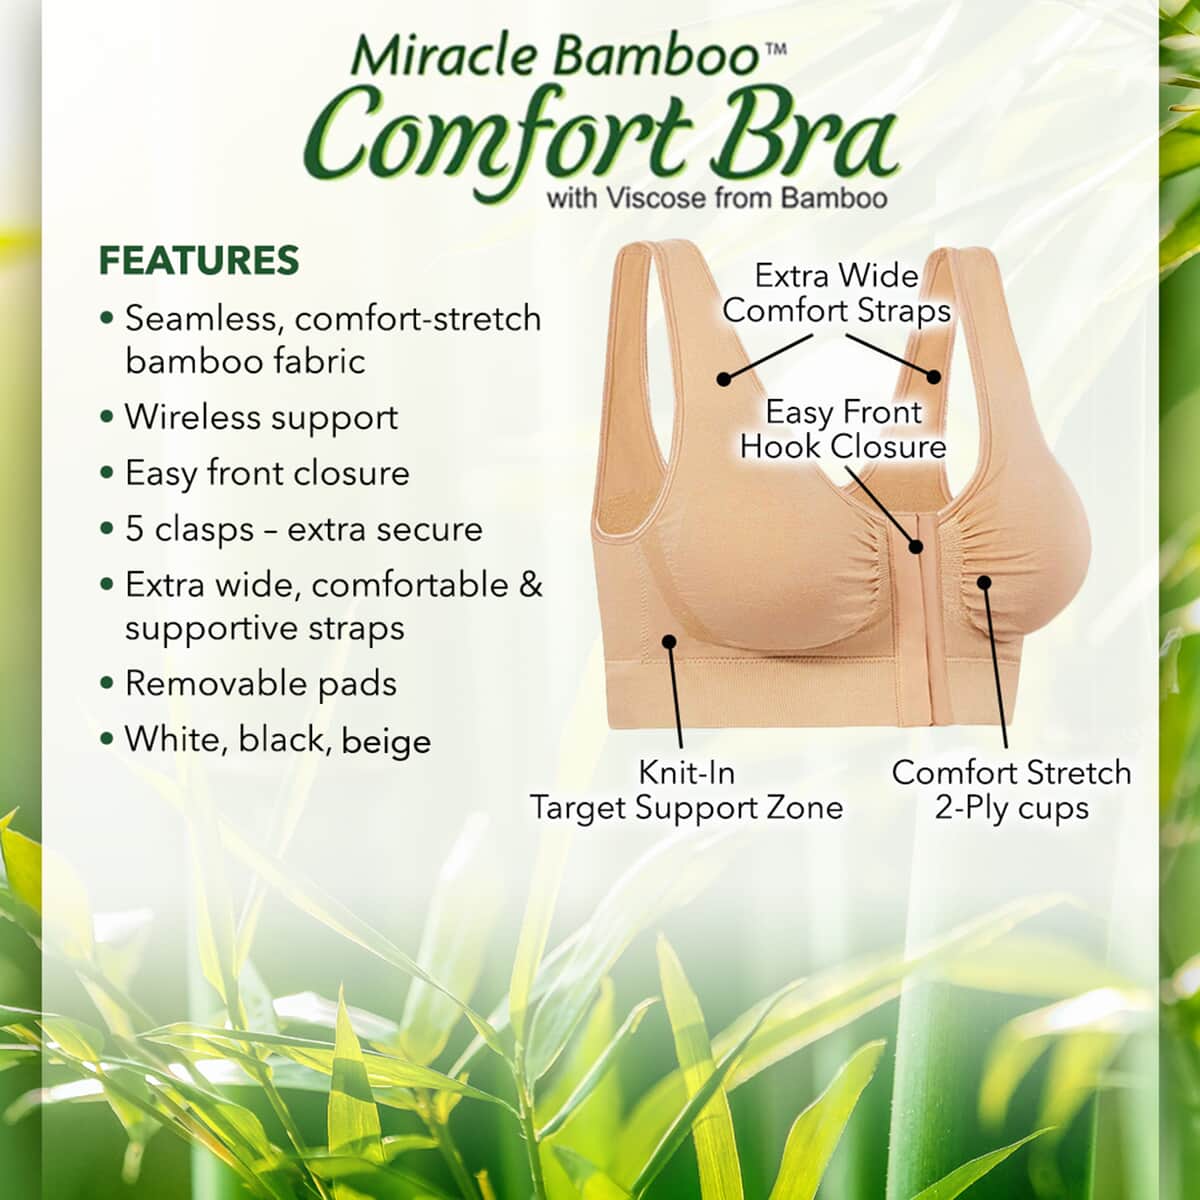 Buy TLV Miracle Bamboo Beyond Comfort Bra Set of 3 Front Closure Bras -  Black, Beige and White - Size 3XL at ShopLC.